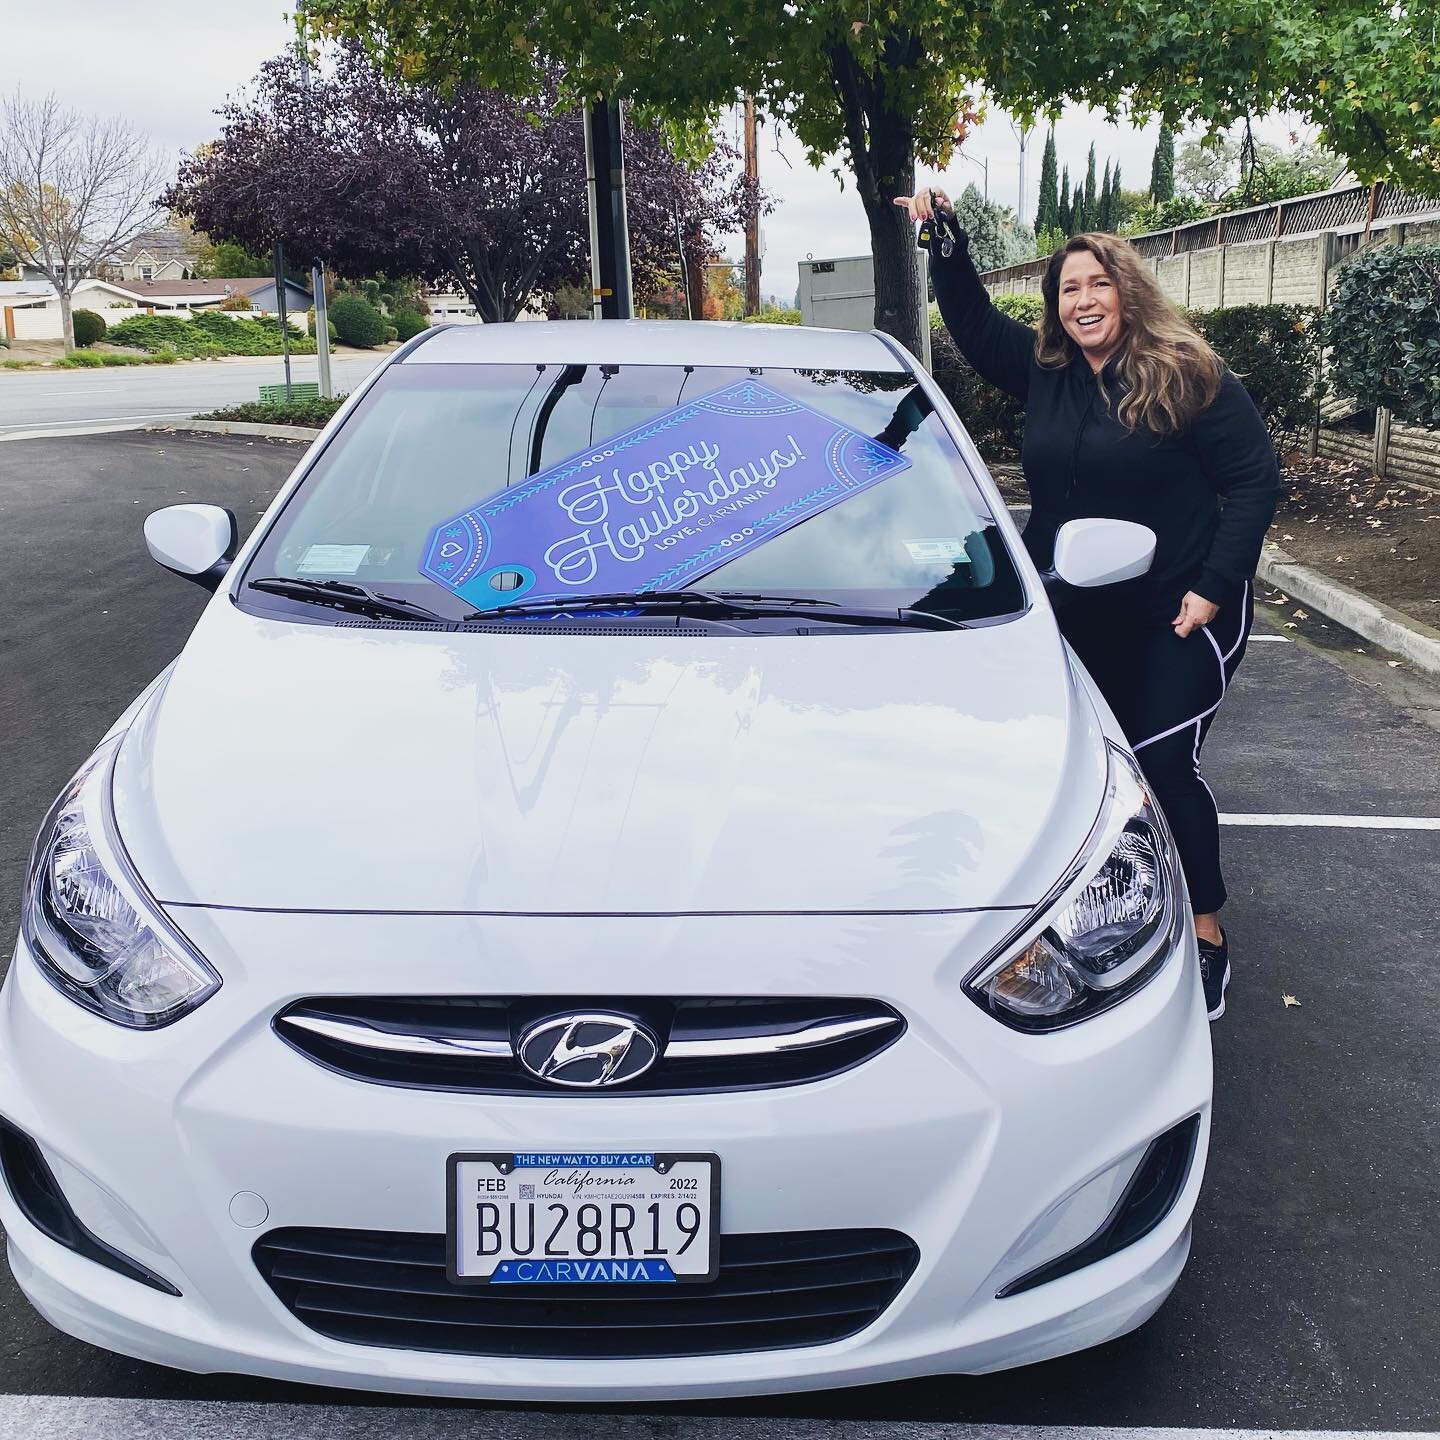 This is the 19th car in 2 years that Maintenance for Moms has been able to purchase from @gocarvana for a struggling single mom in Santa Clara County. There is no better feeling than giving such an unexpected gift to such a deserving mom. @gocarvana 